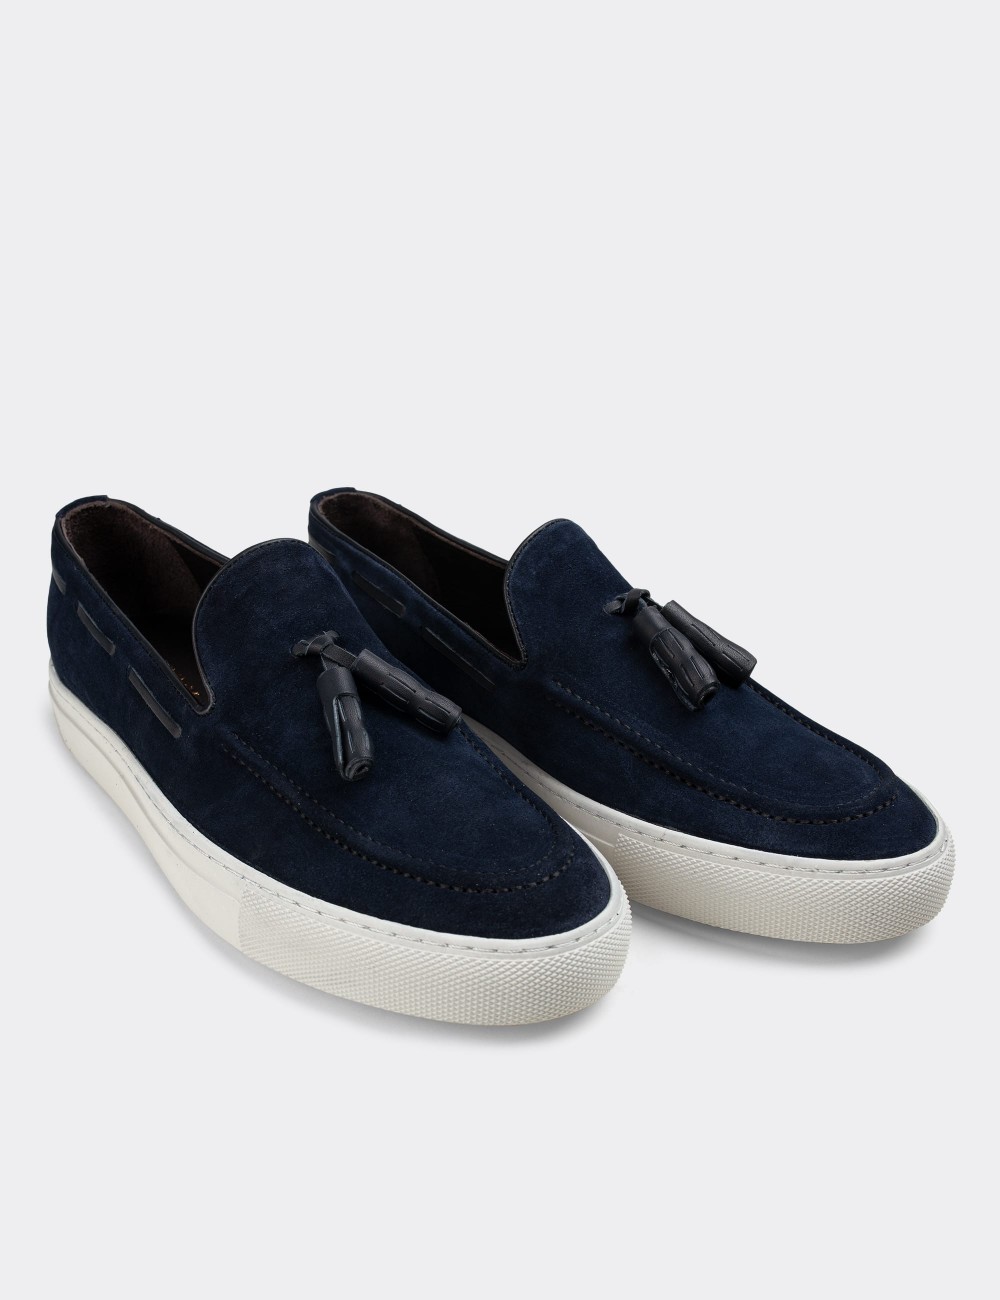 Navy Suede Leather Sneakers - 01836MLCVC01